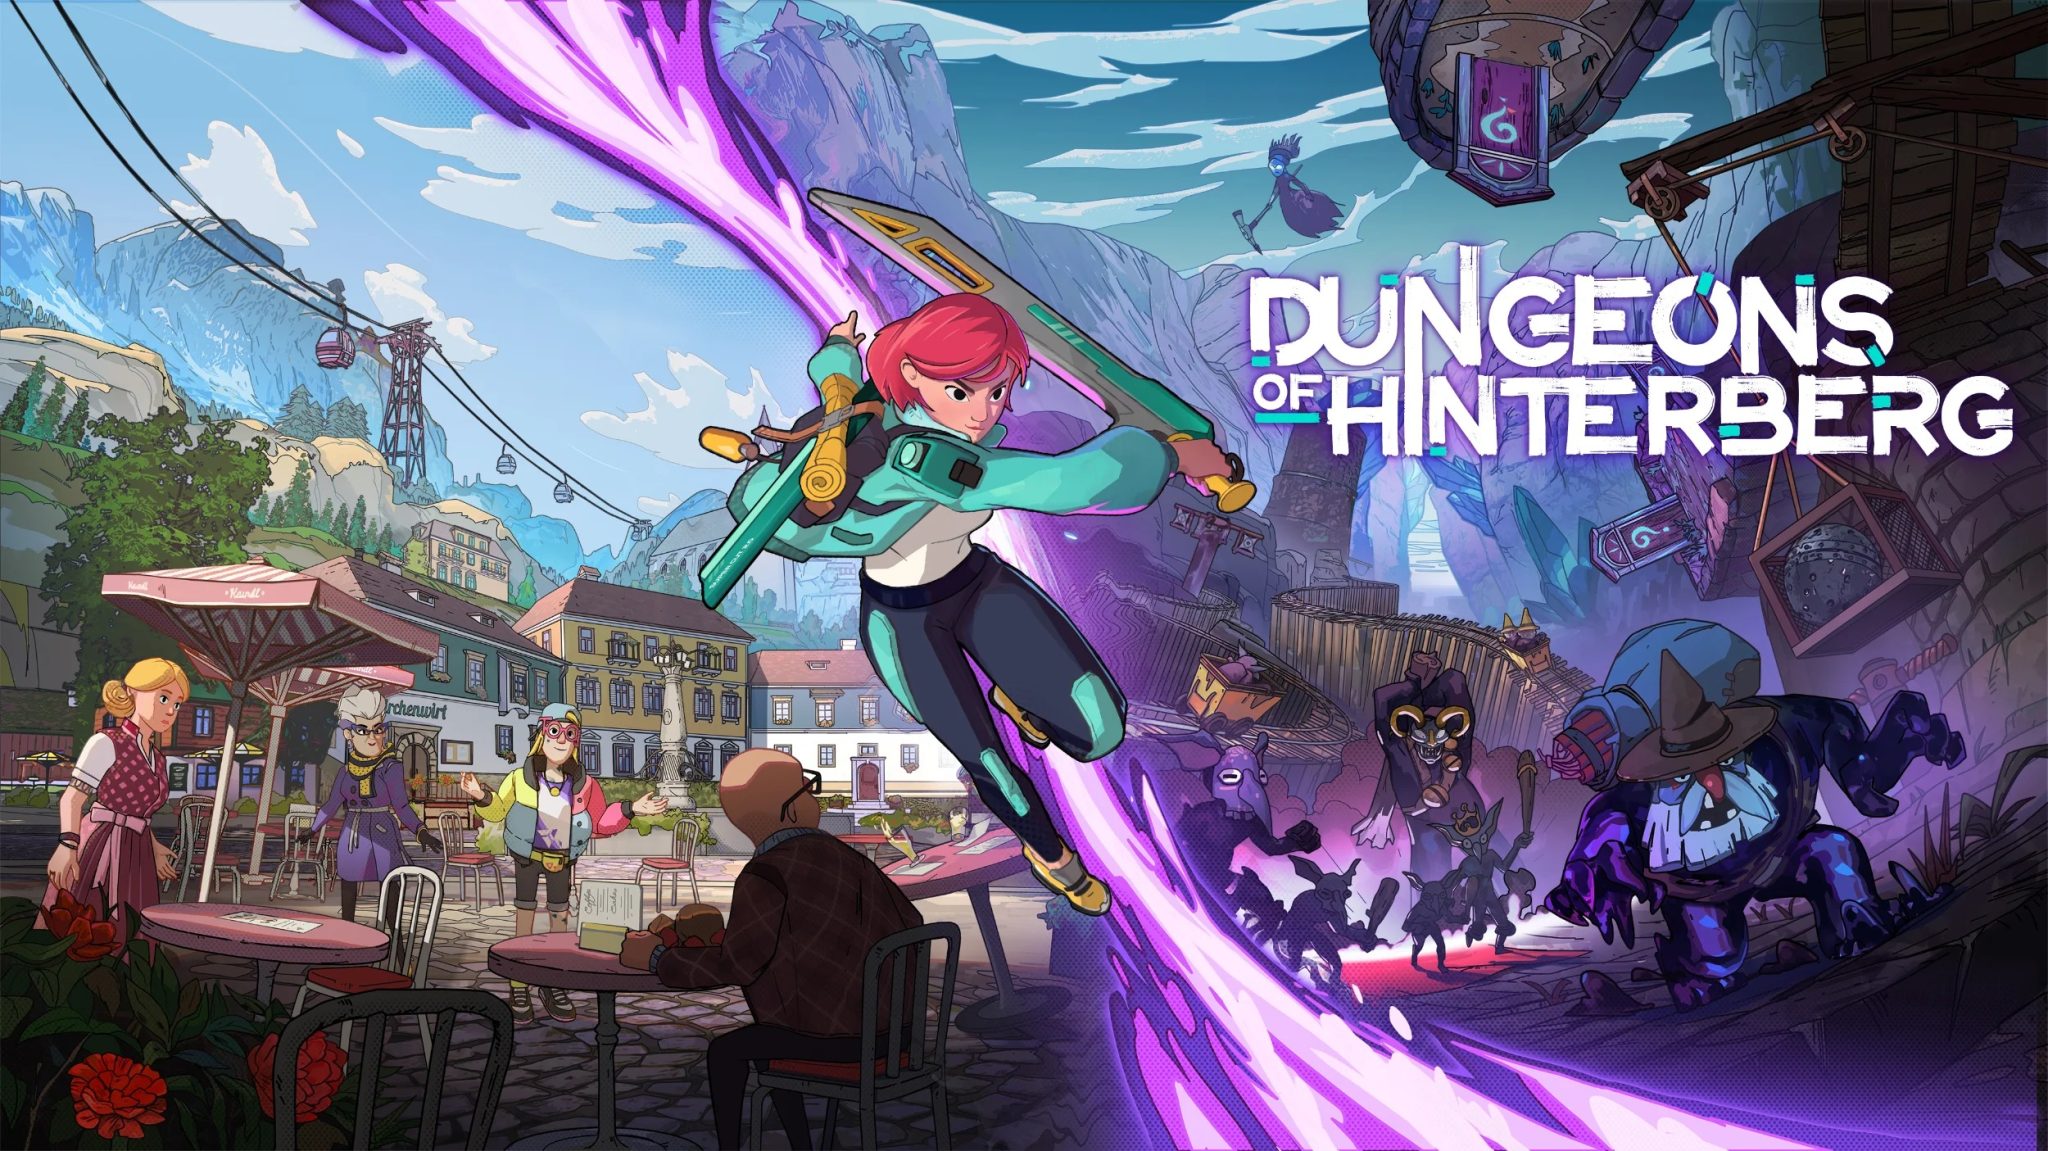 It's official: Dungeons of Hinterberg will be released on July 18